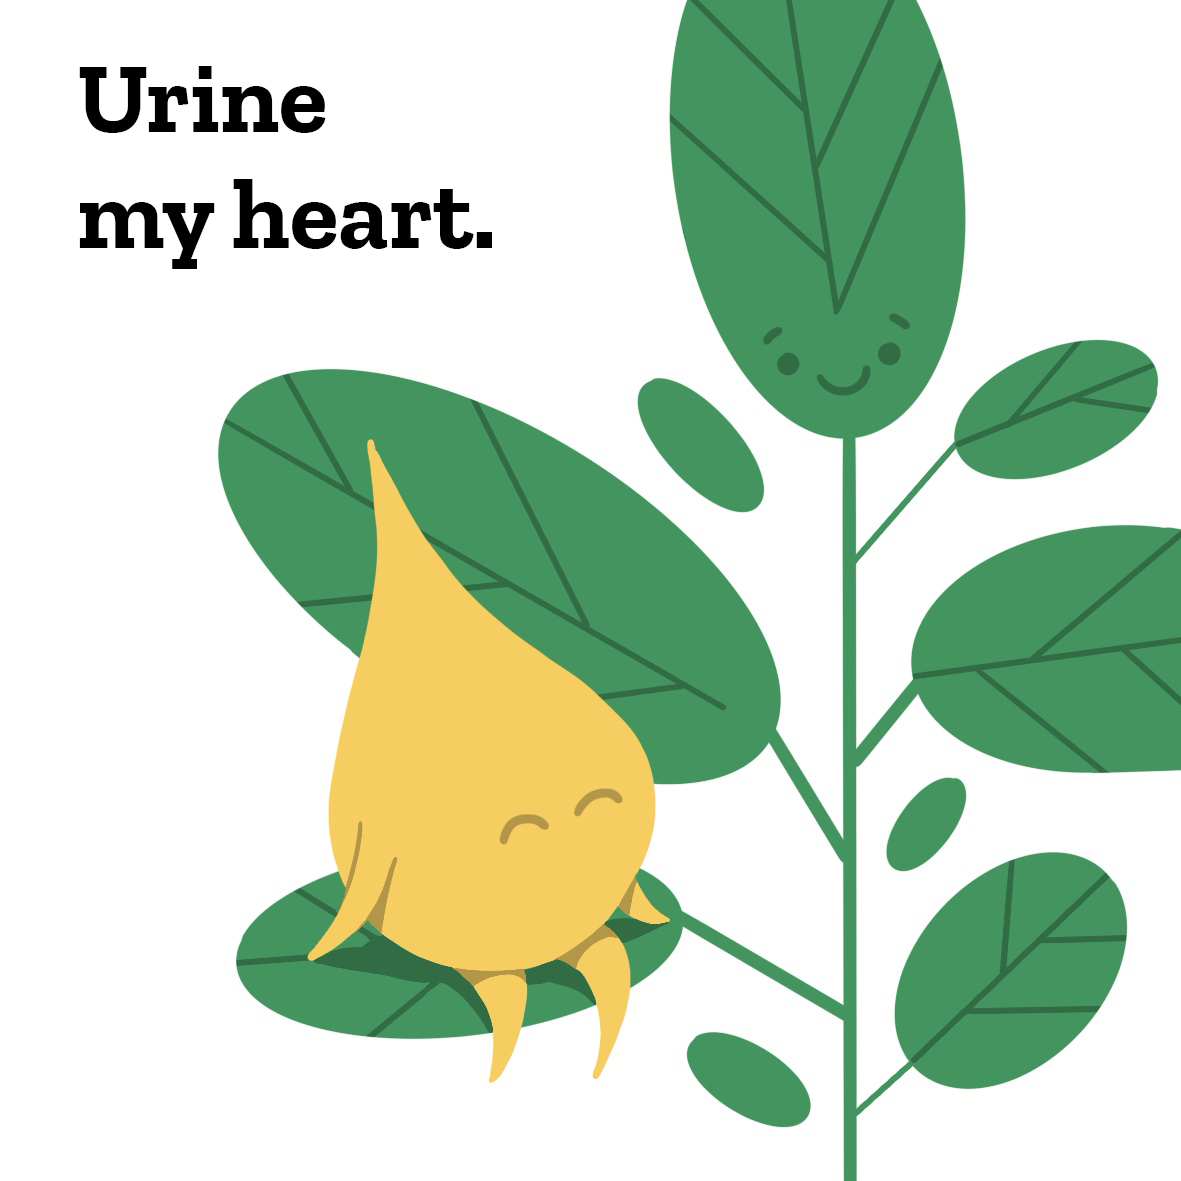 A drop of urine is sitting on a plant and says „Urine my heart.“